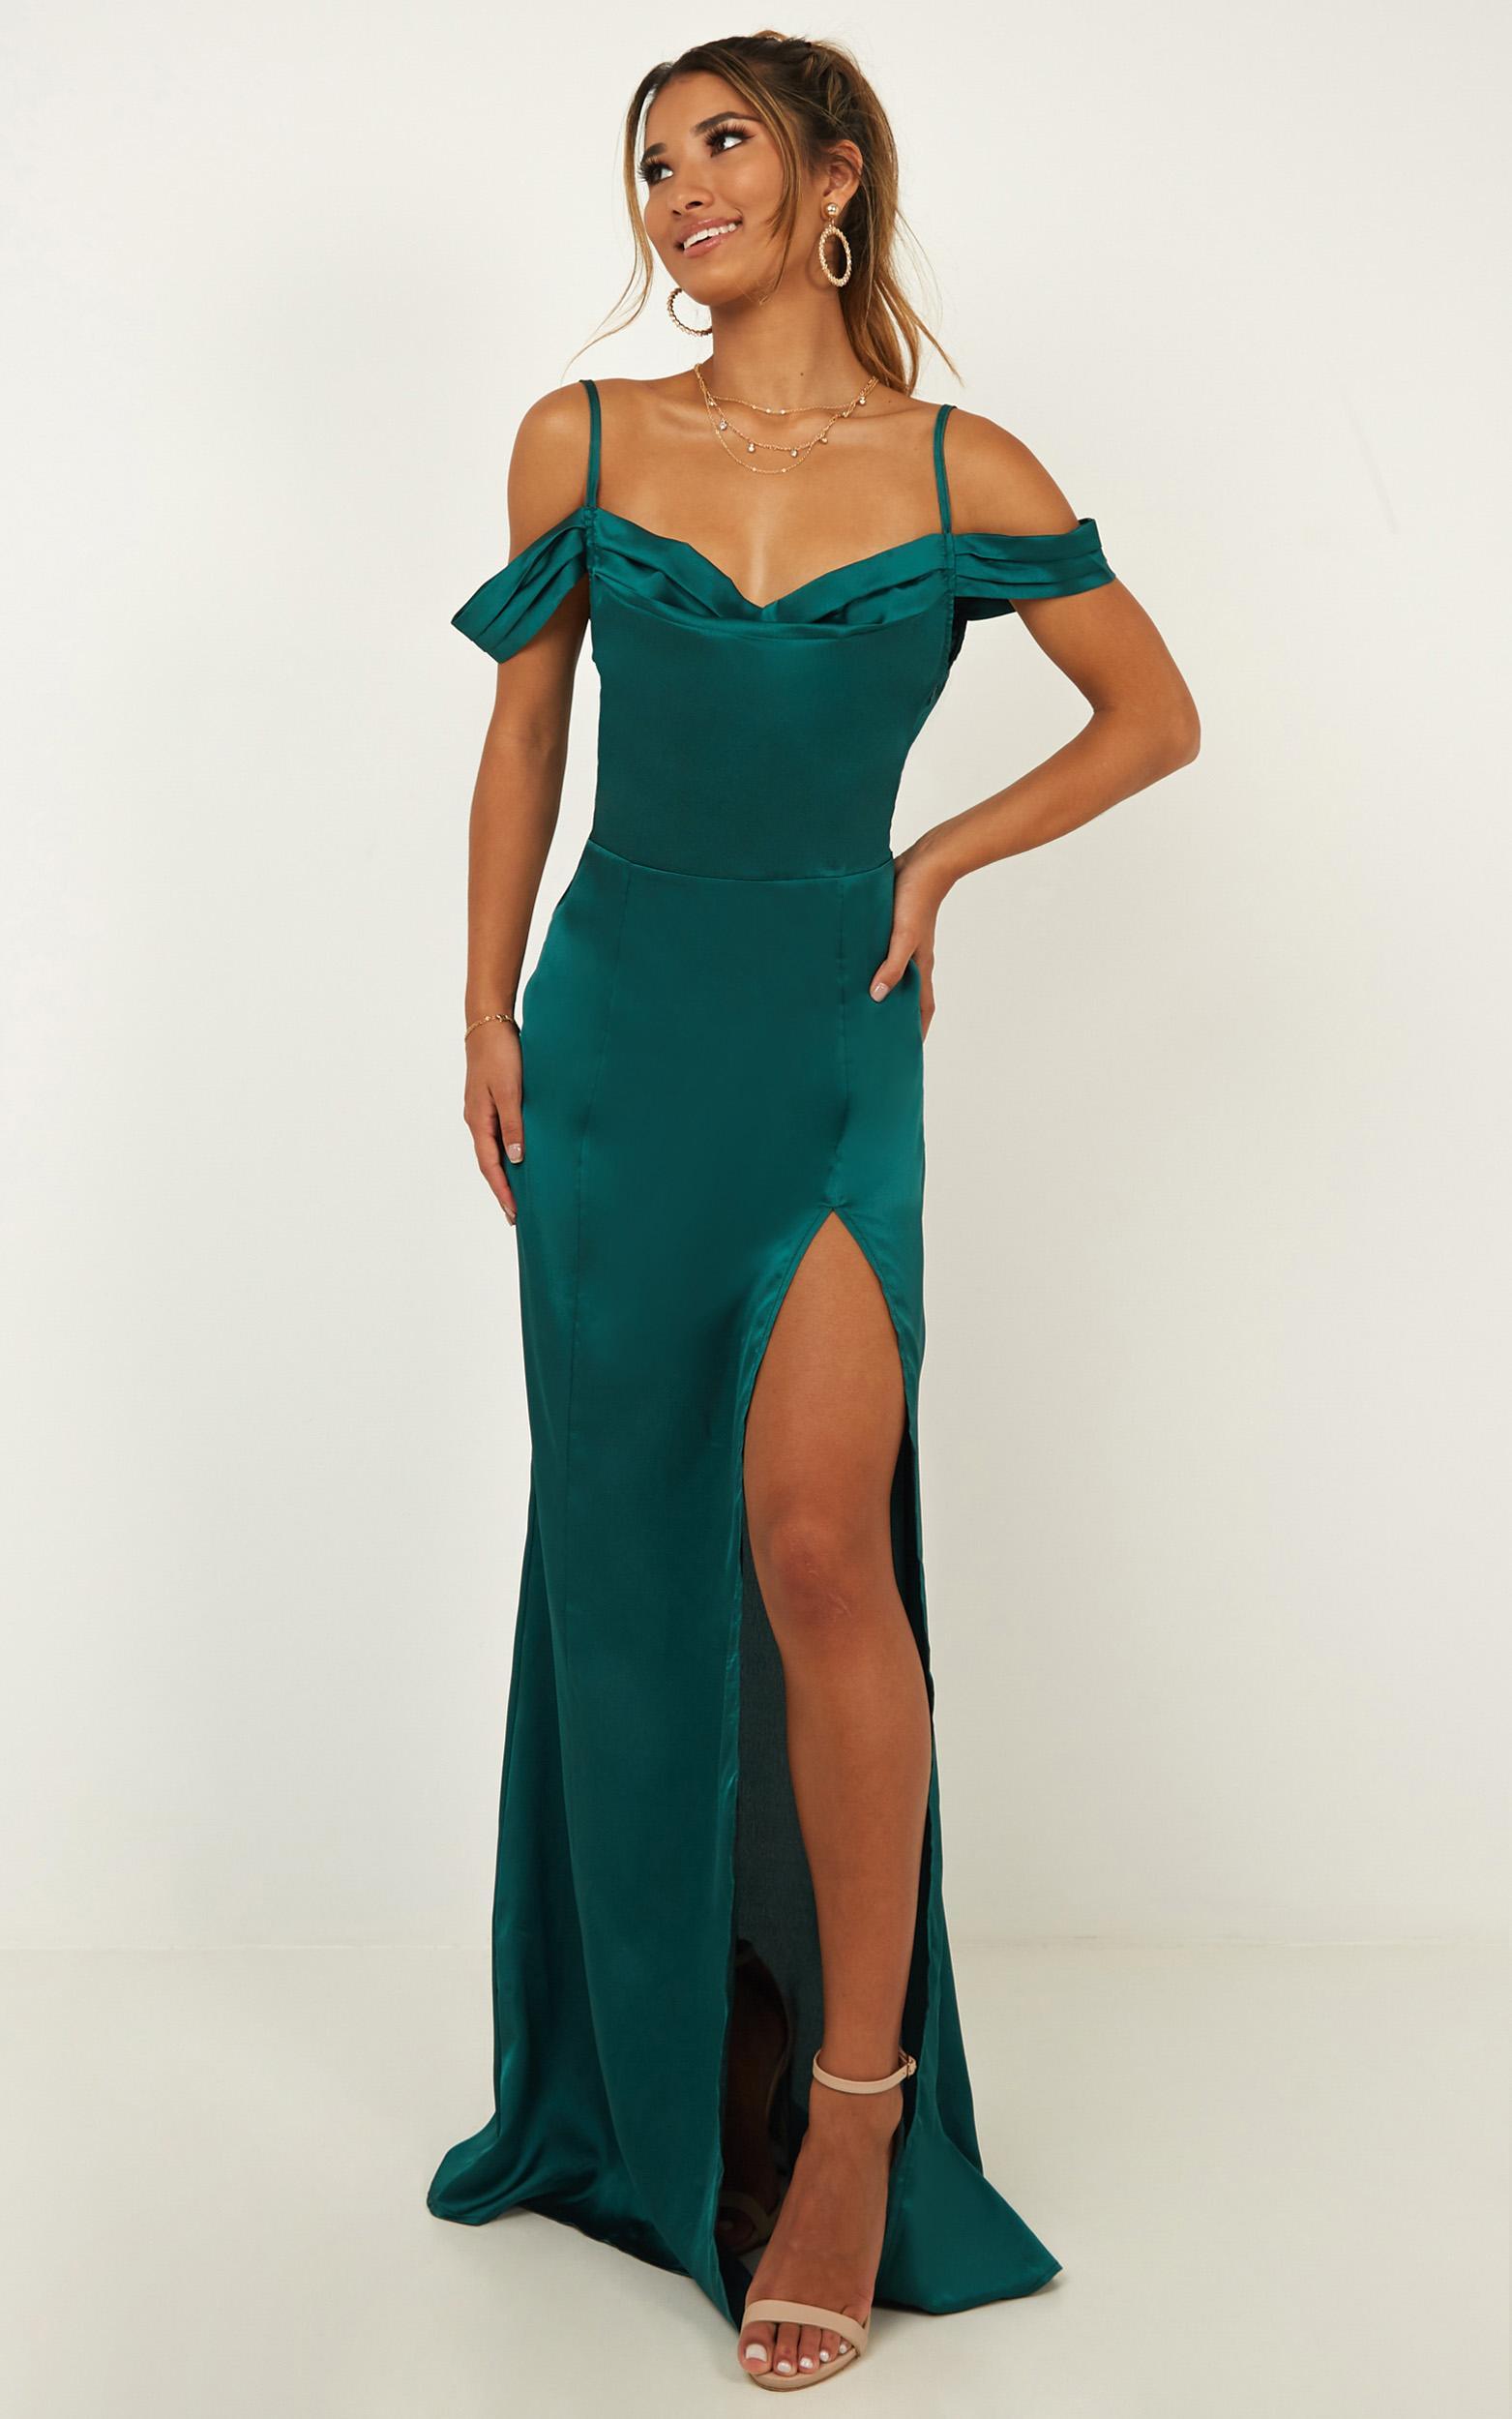 City Is Mine Dress in emerald satin, Green, hi-res image number null